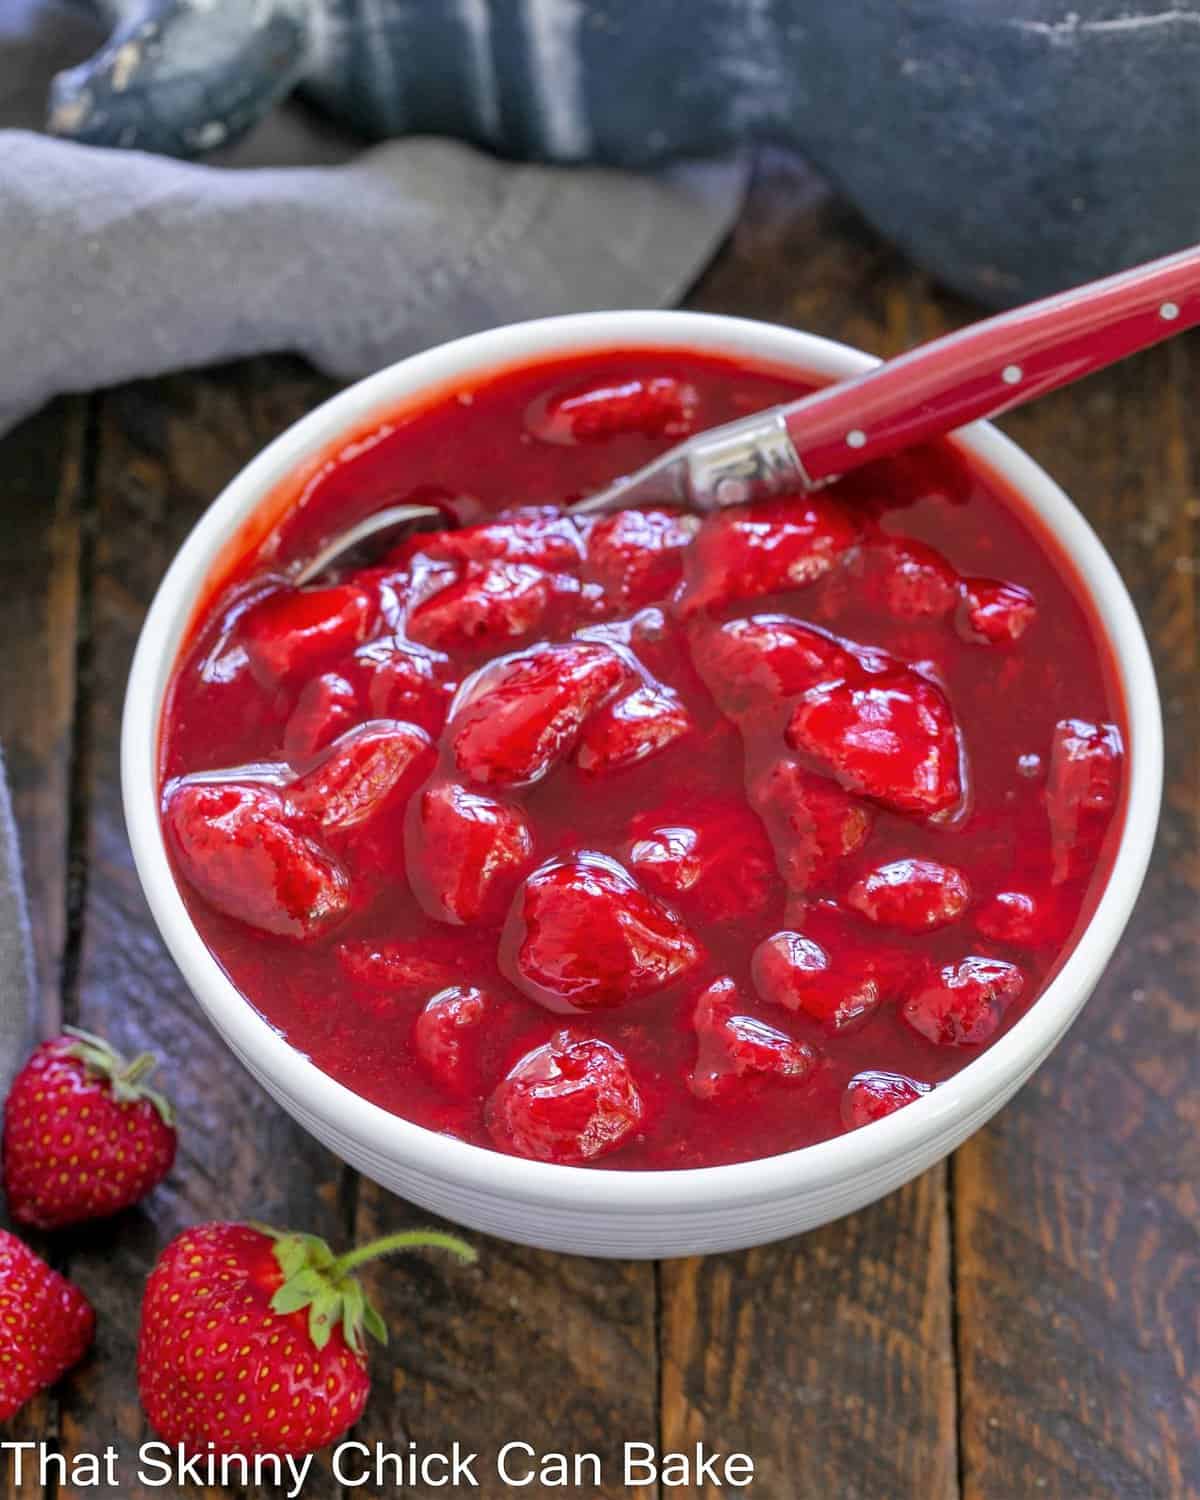 Overhead view of fresh strawberry sauce in a white bowl with a spoon.